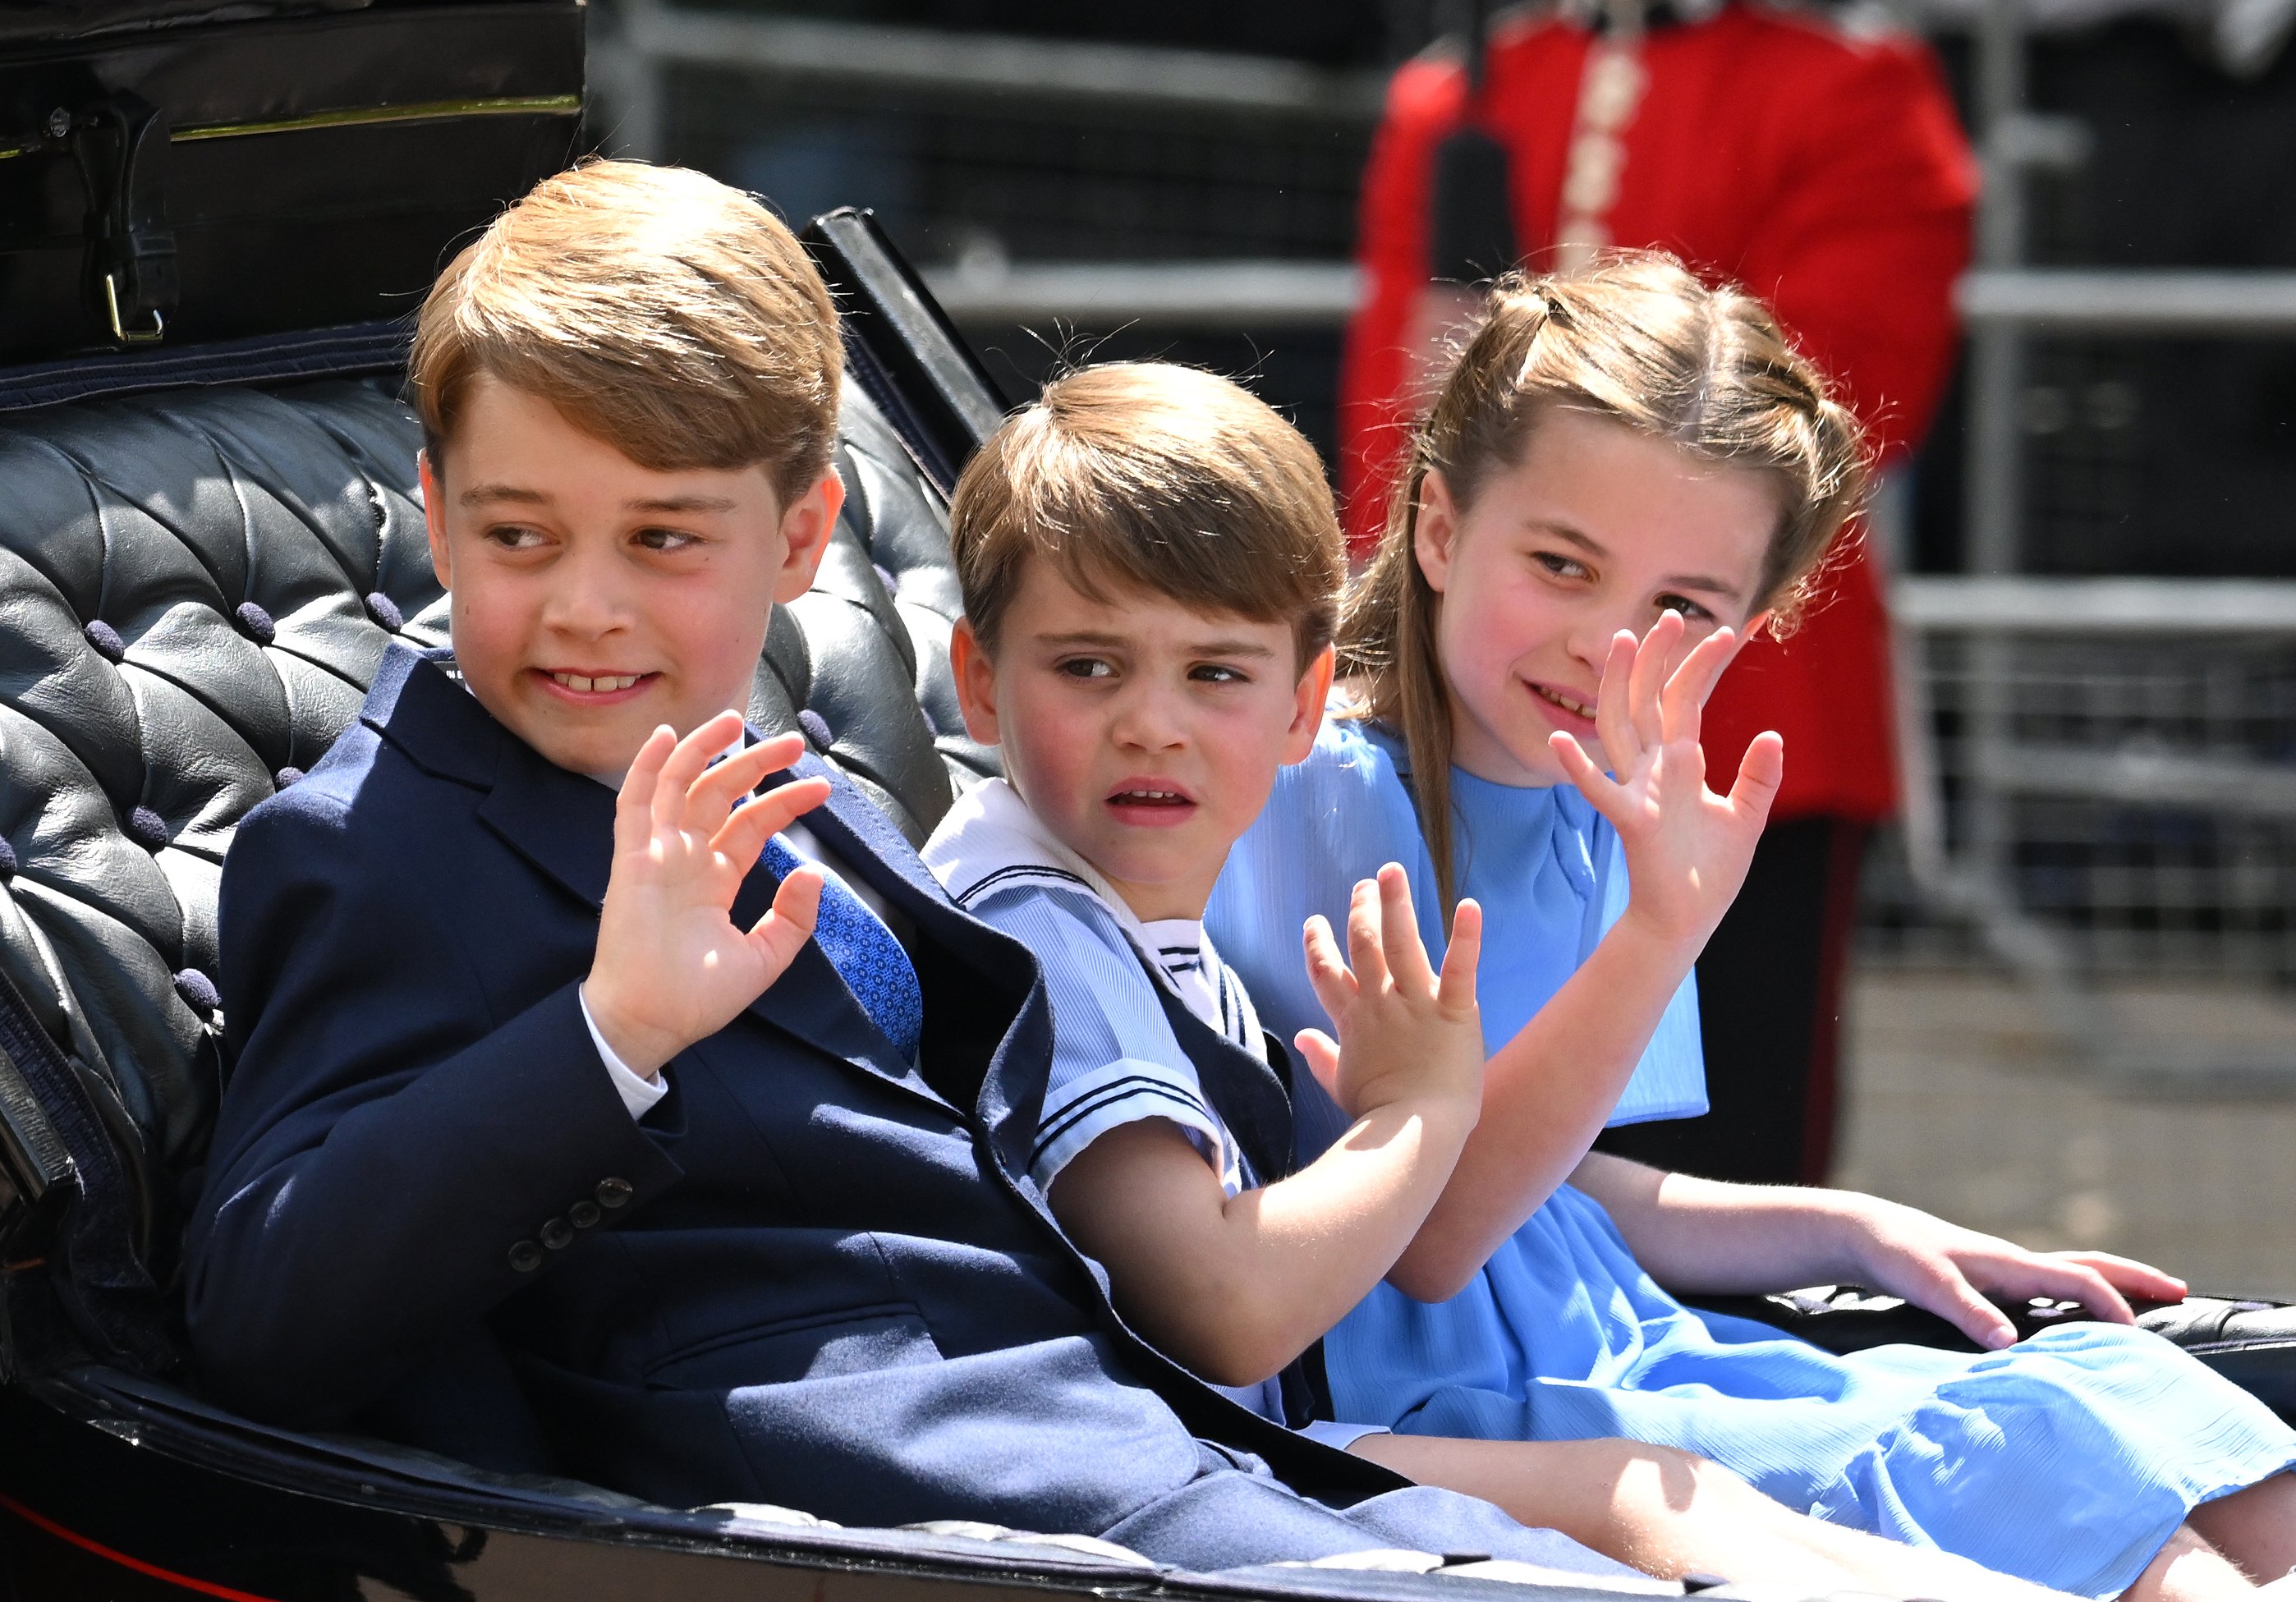 Prince George, Princess Charlotte and Prince Louis in London 2022. | Source: Getty Images